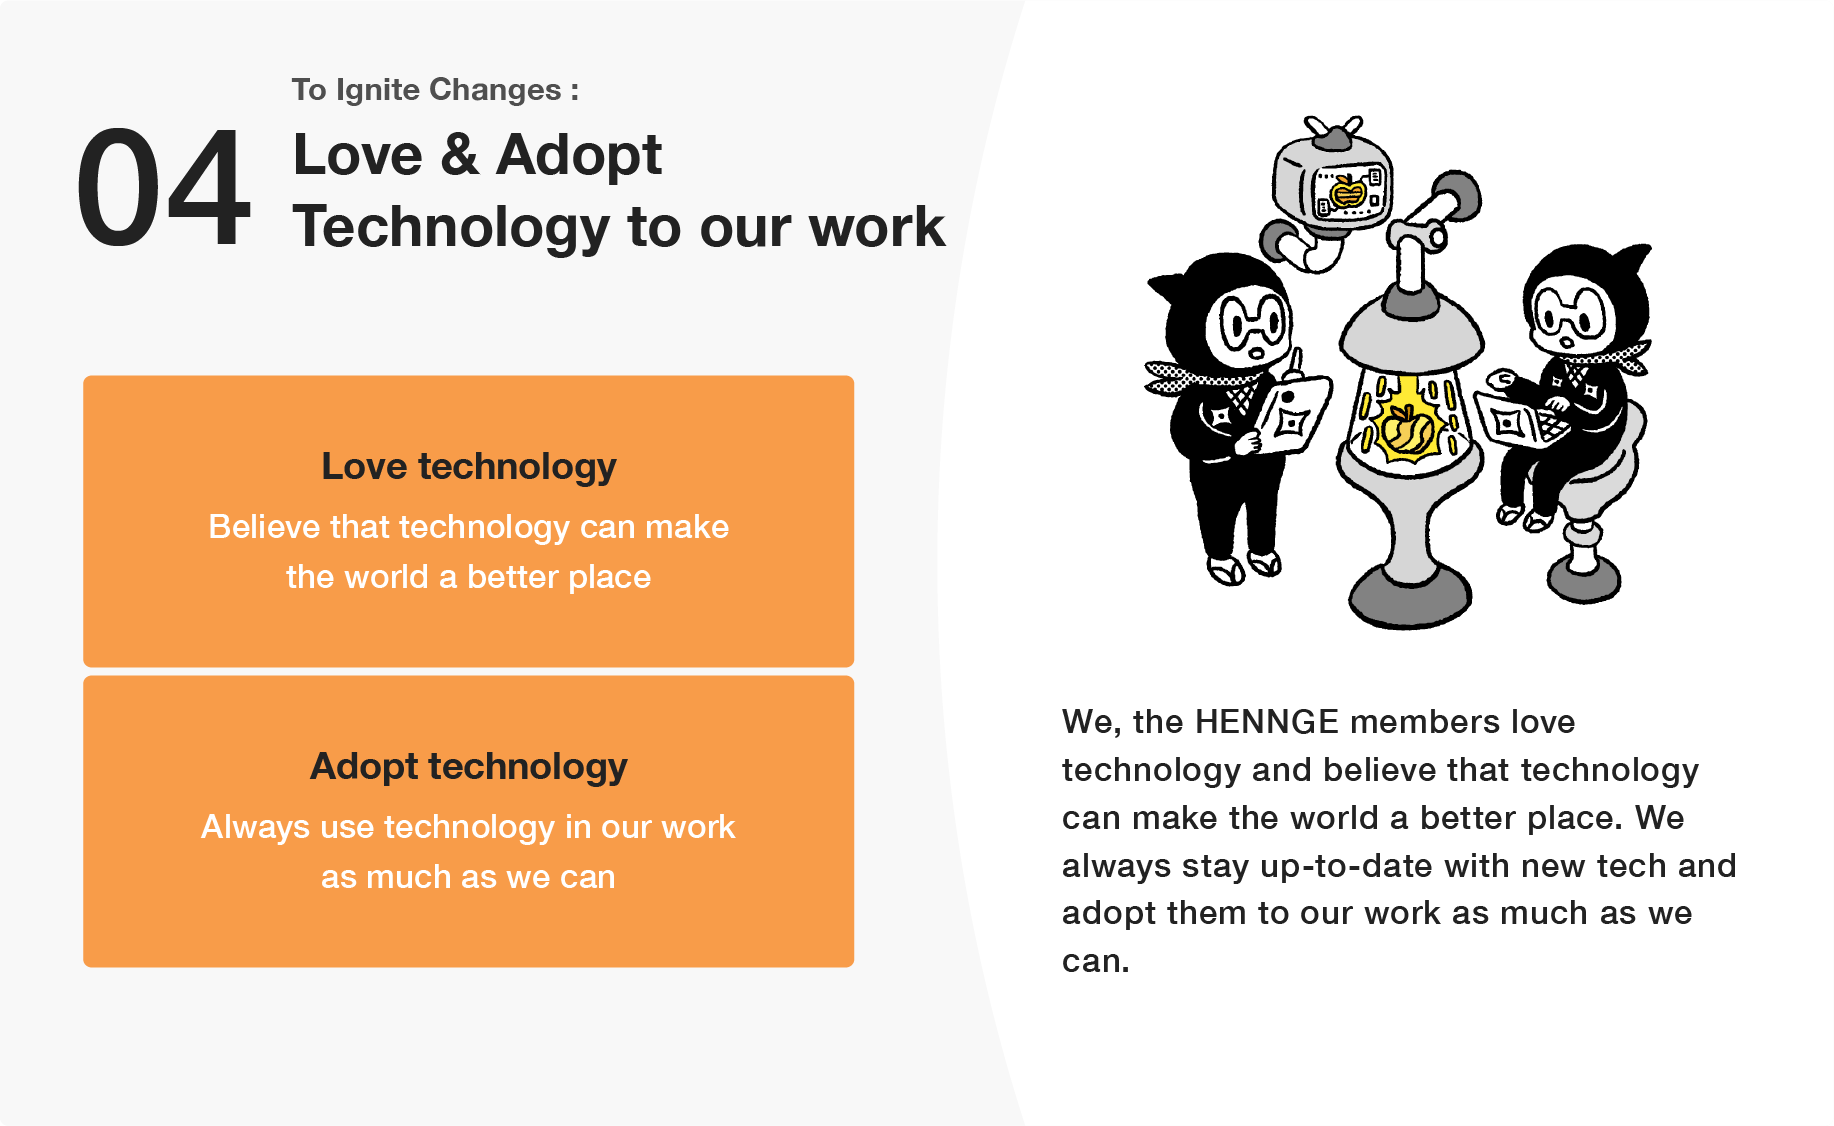 04 LOVE & ADOPT TECHNOLOGY TO OUR WORK